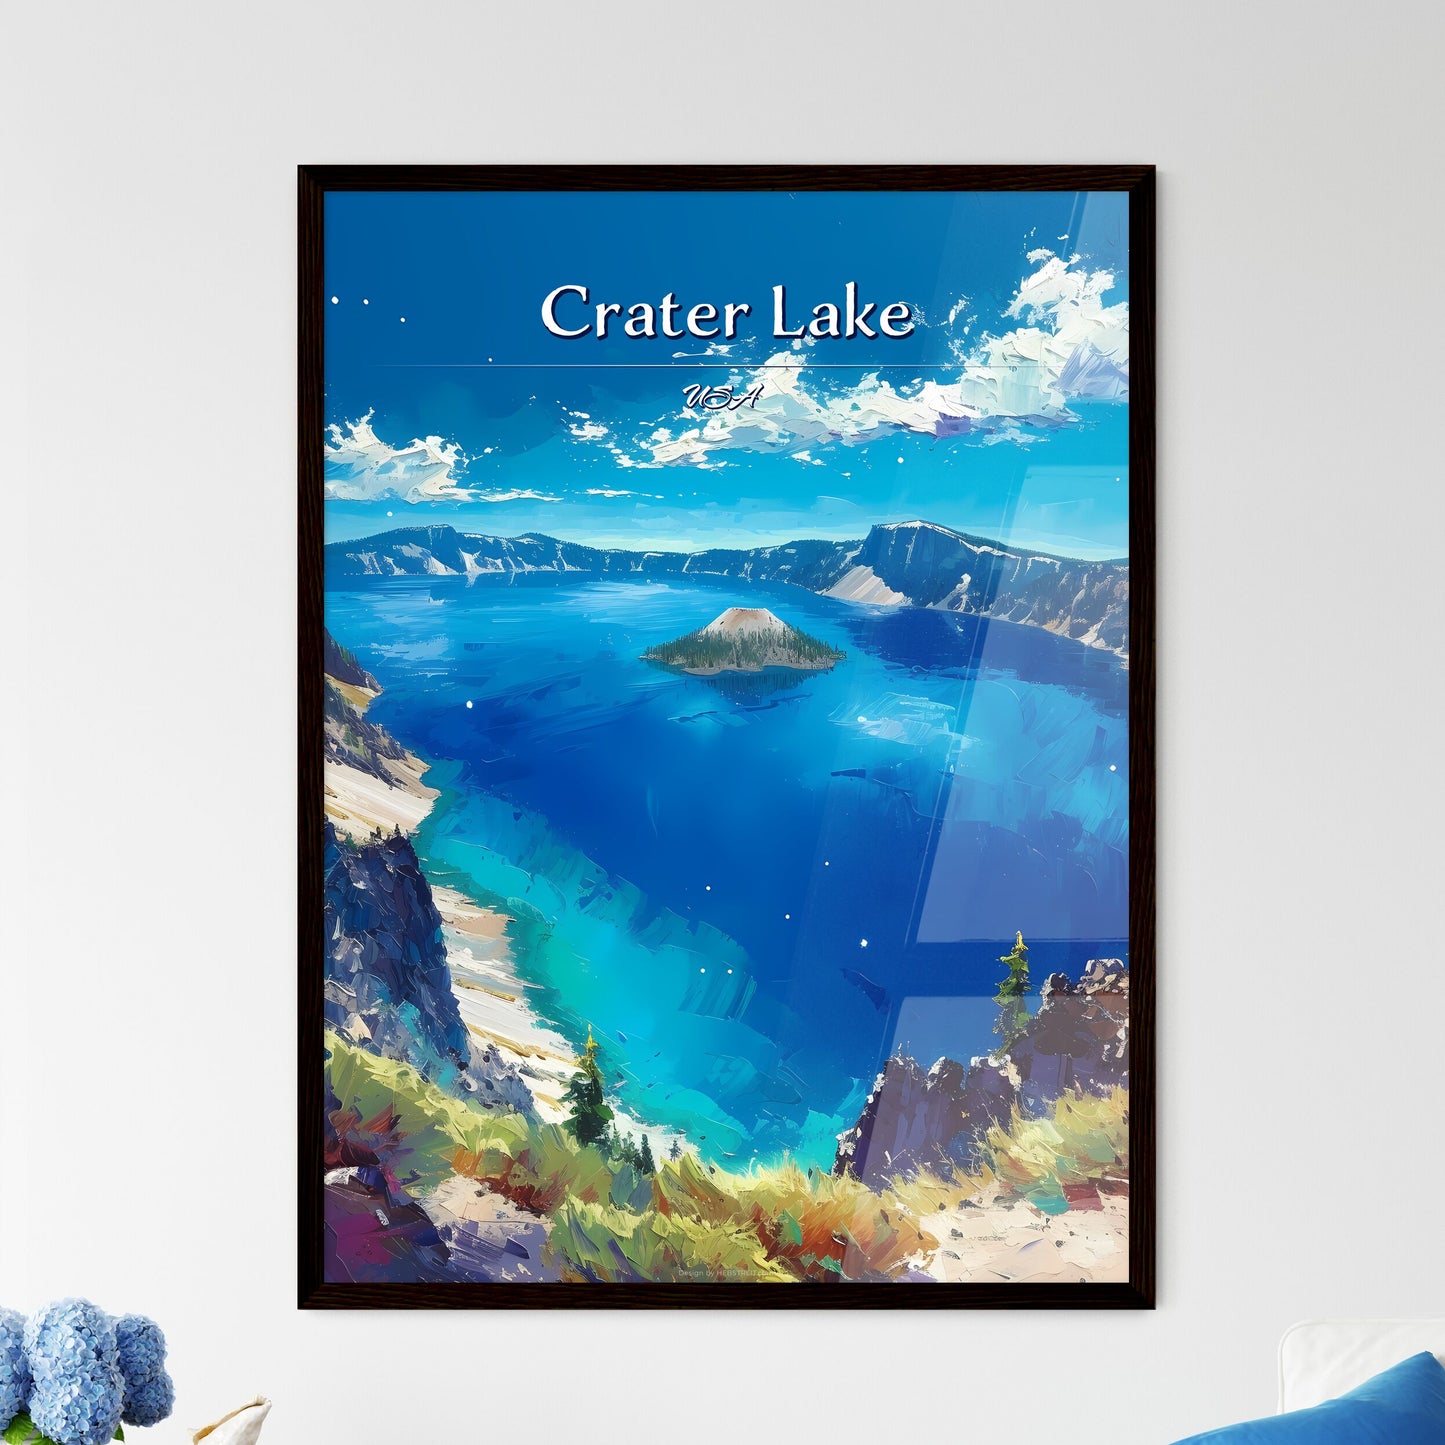 Crater Lake, USA - Art print of a large body of water with a small island in the middle Default Title